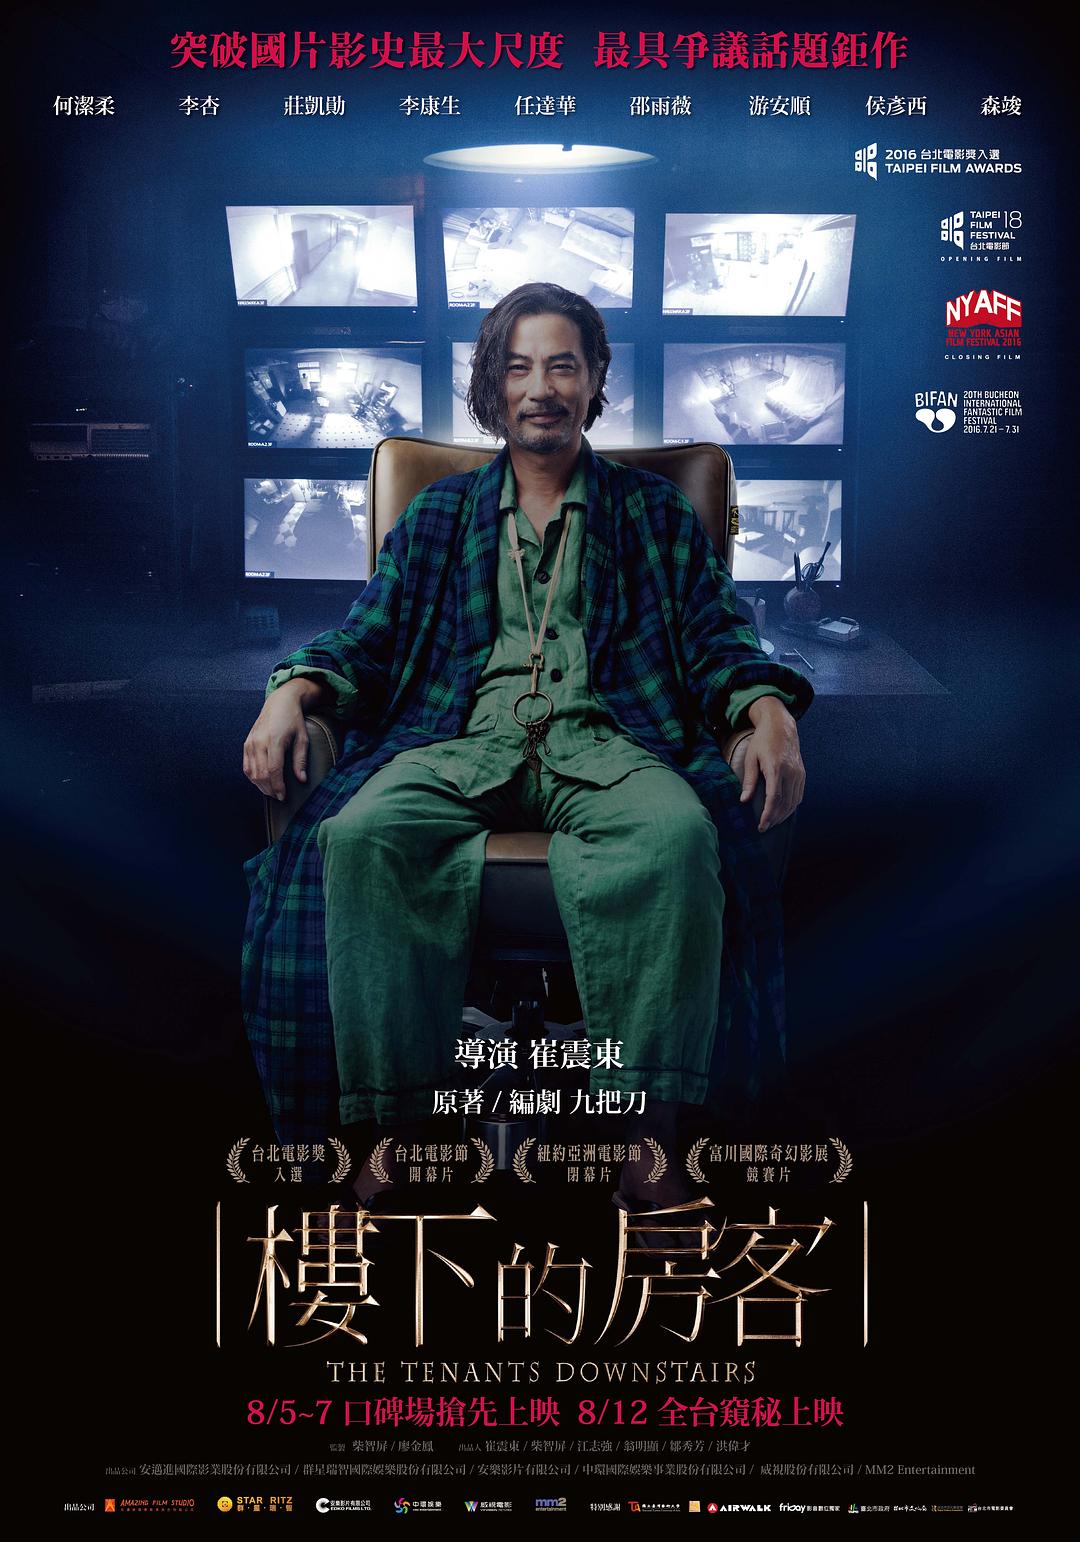 µķ The.Tenants.Downstairs.2016.CHINESE.1080p.BluRay.x264-WiKi 10.98GB-1.png